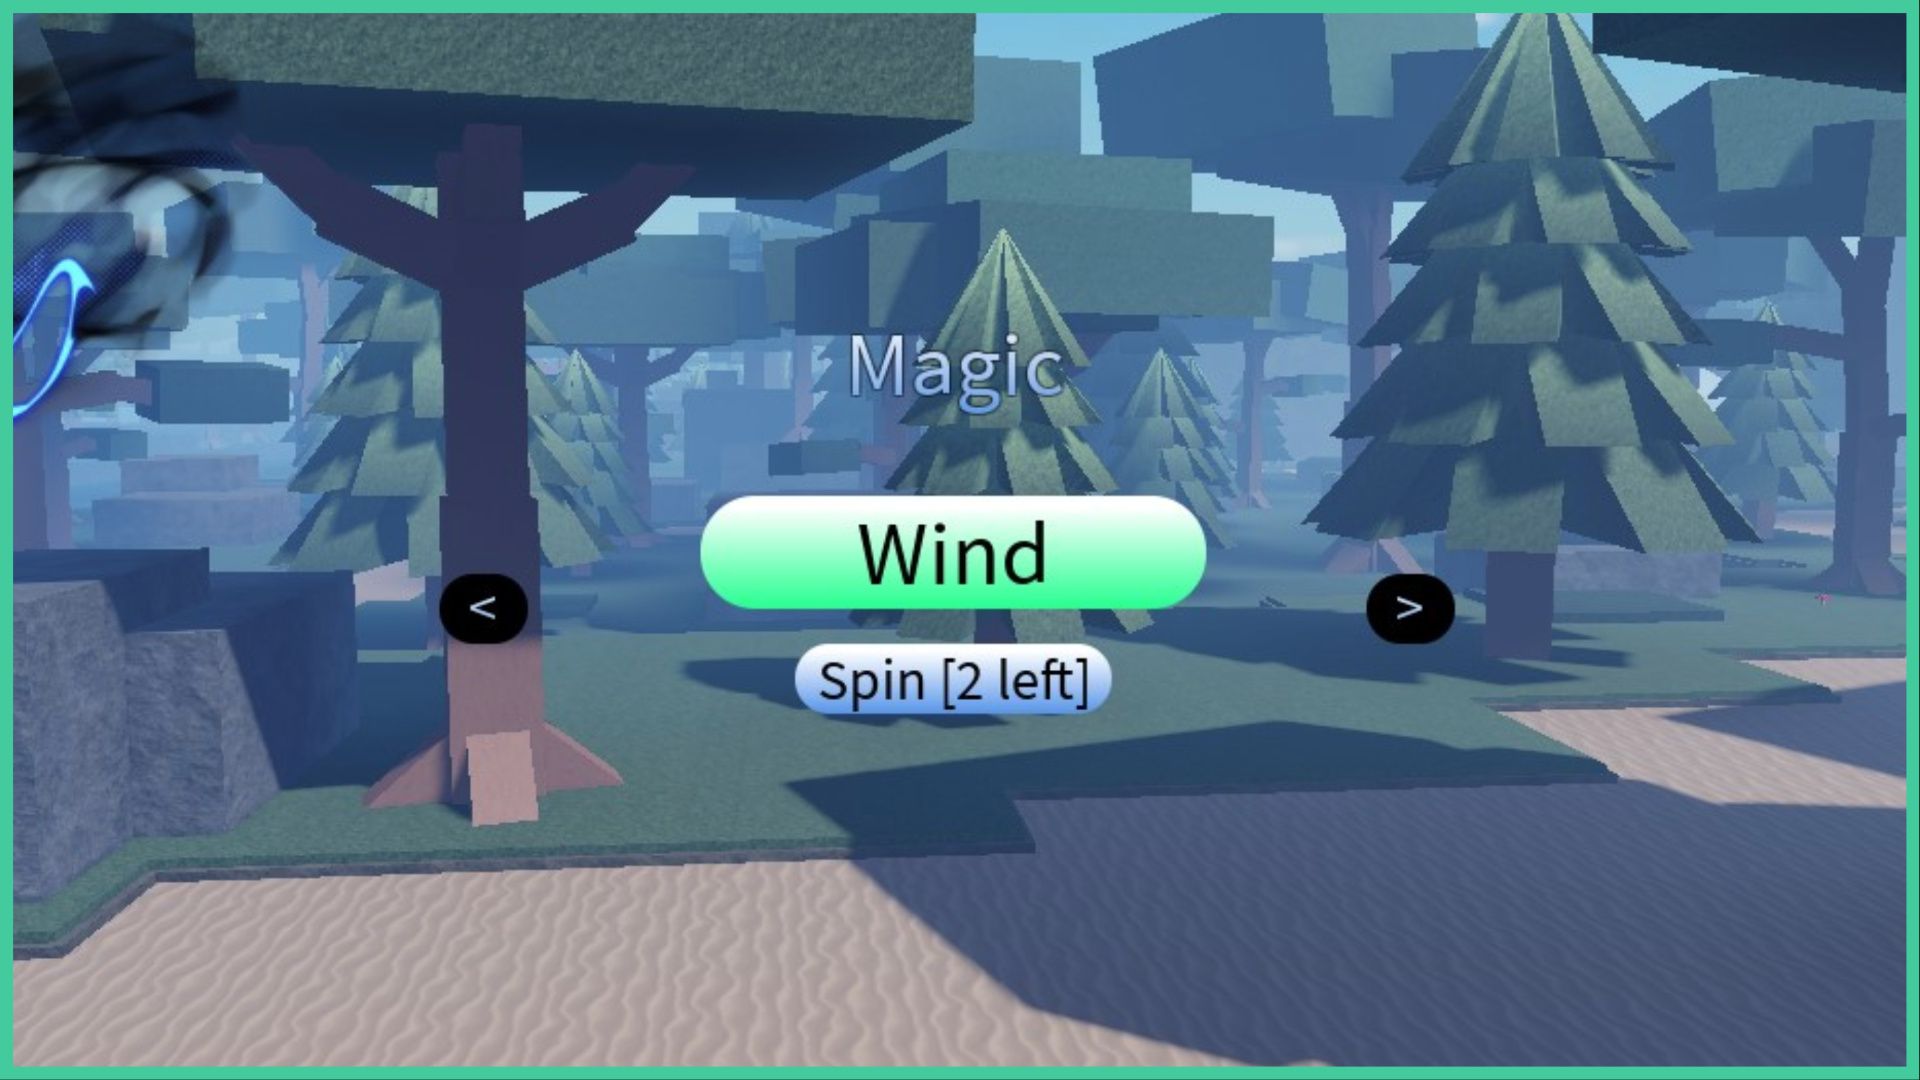 feature image for our clover retribution magic guide, the image features a screenshot from the spin page in the game, specifically of the magic type rolls, the current magic type on the screen is wind and there is a button that says "Spin (2 left)", the background is of a forest with trees, grass and a dirt path